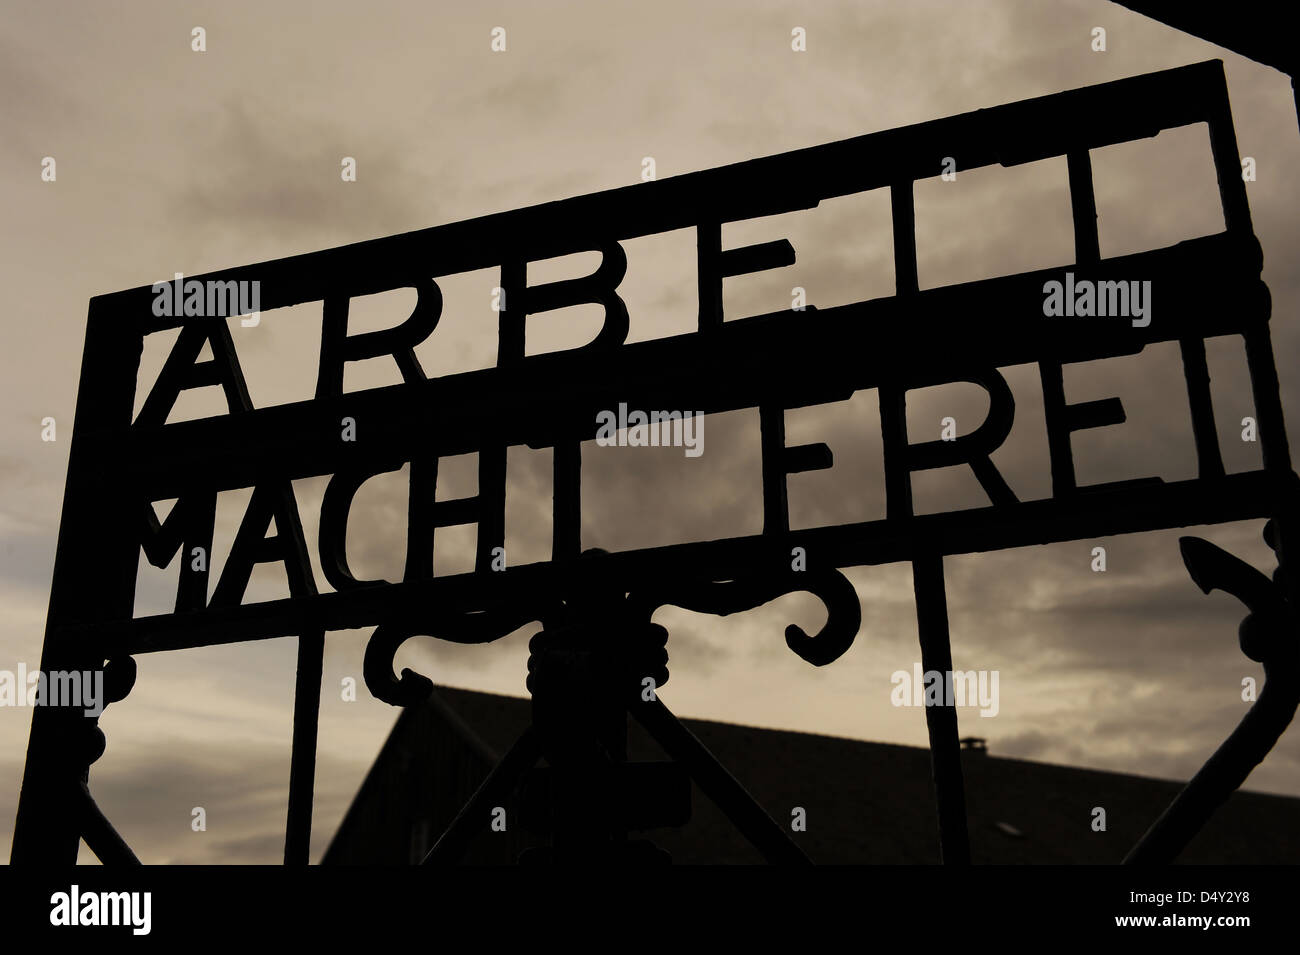 Dachau Concentration Camp. Nazi camp of prisoners opened in 1933. Slogan Arbeit macht frei (Labour makes free). Main door. Stock Photo